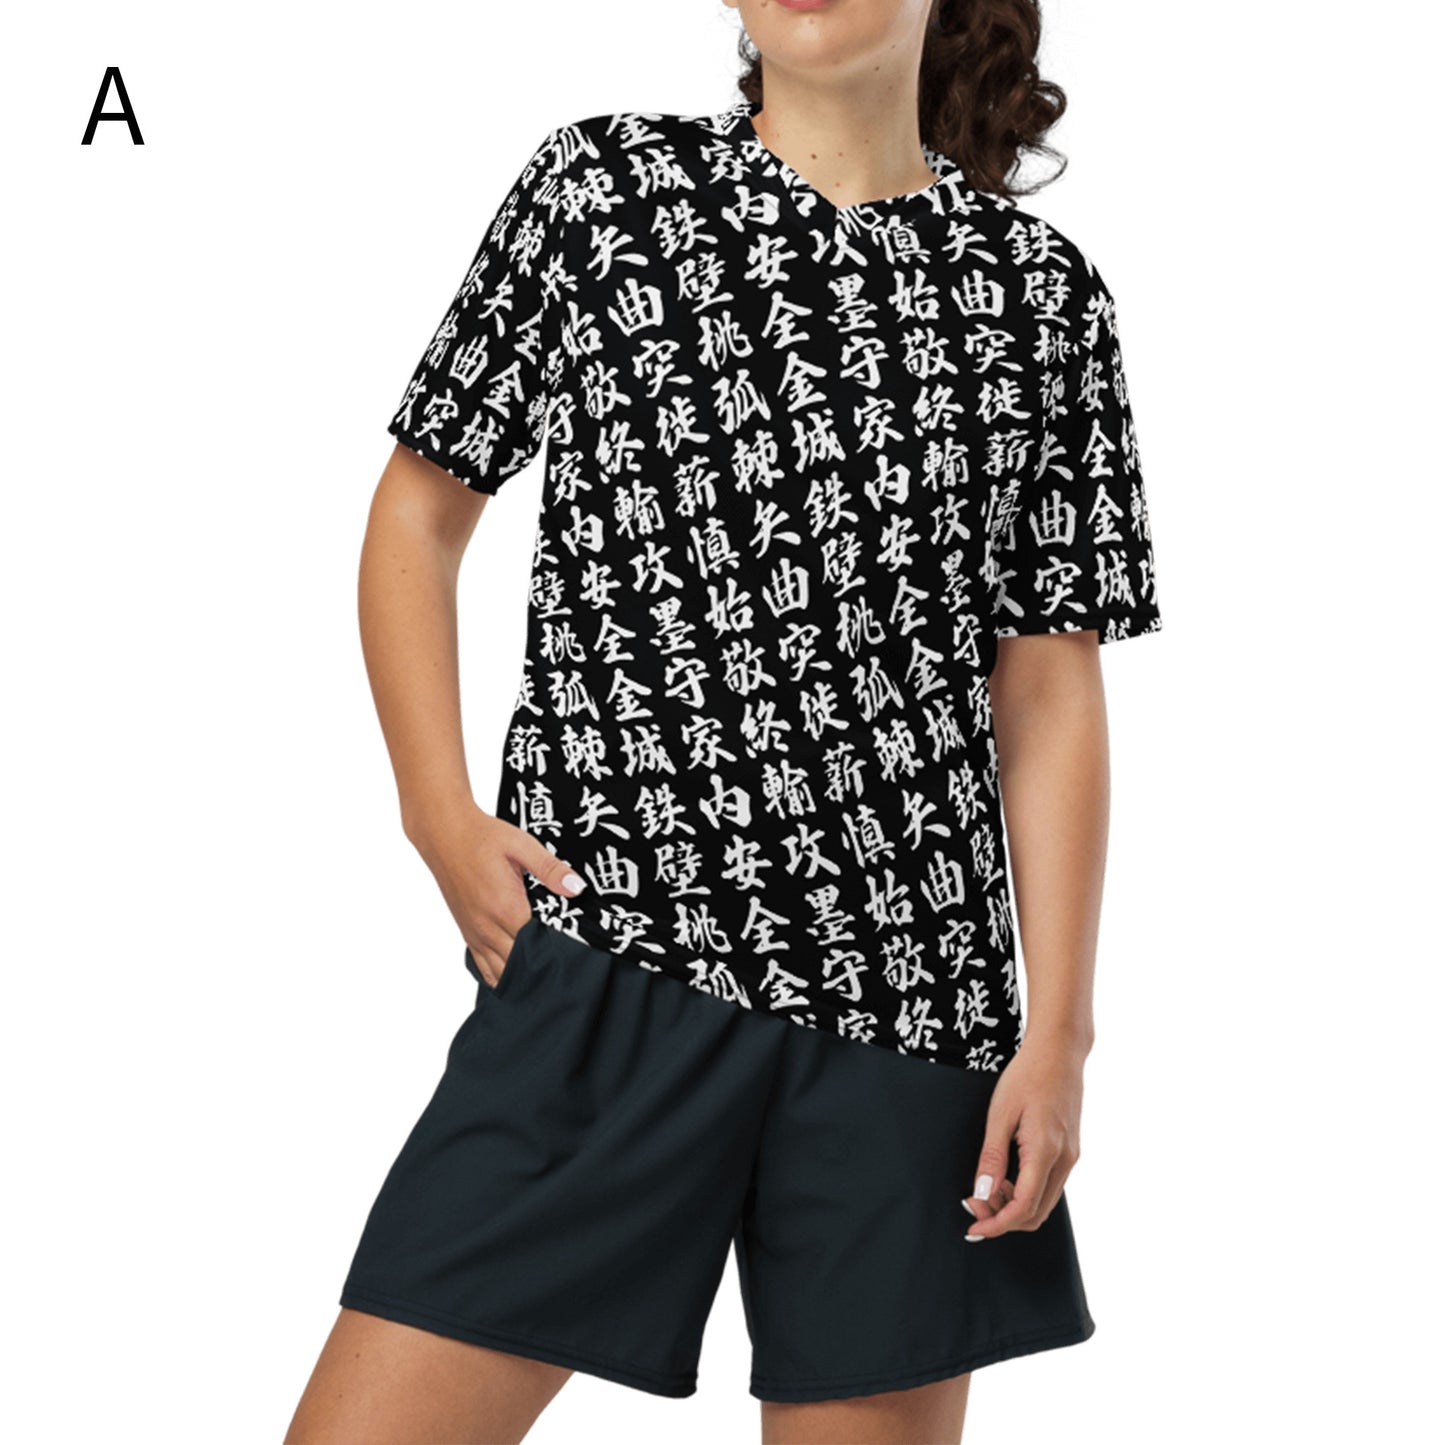 Unisex black Sports Jersey with all-over print in Japanese KANJI- woman model A-2